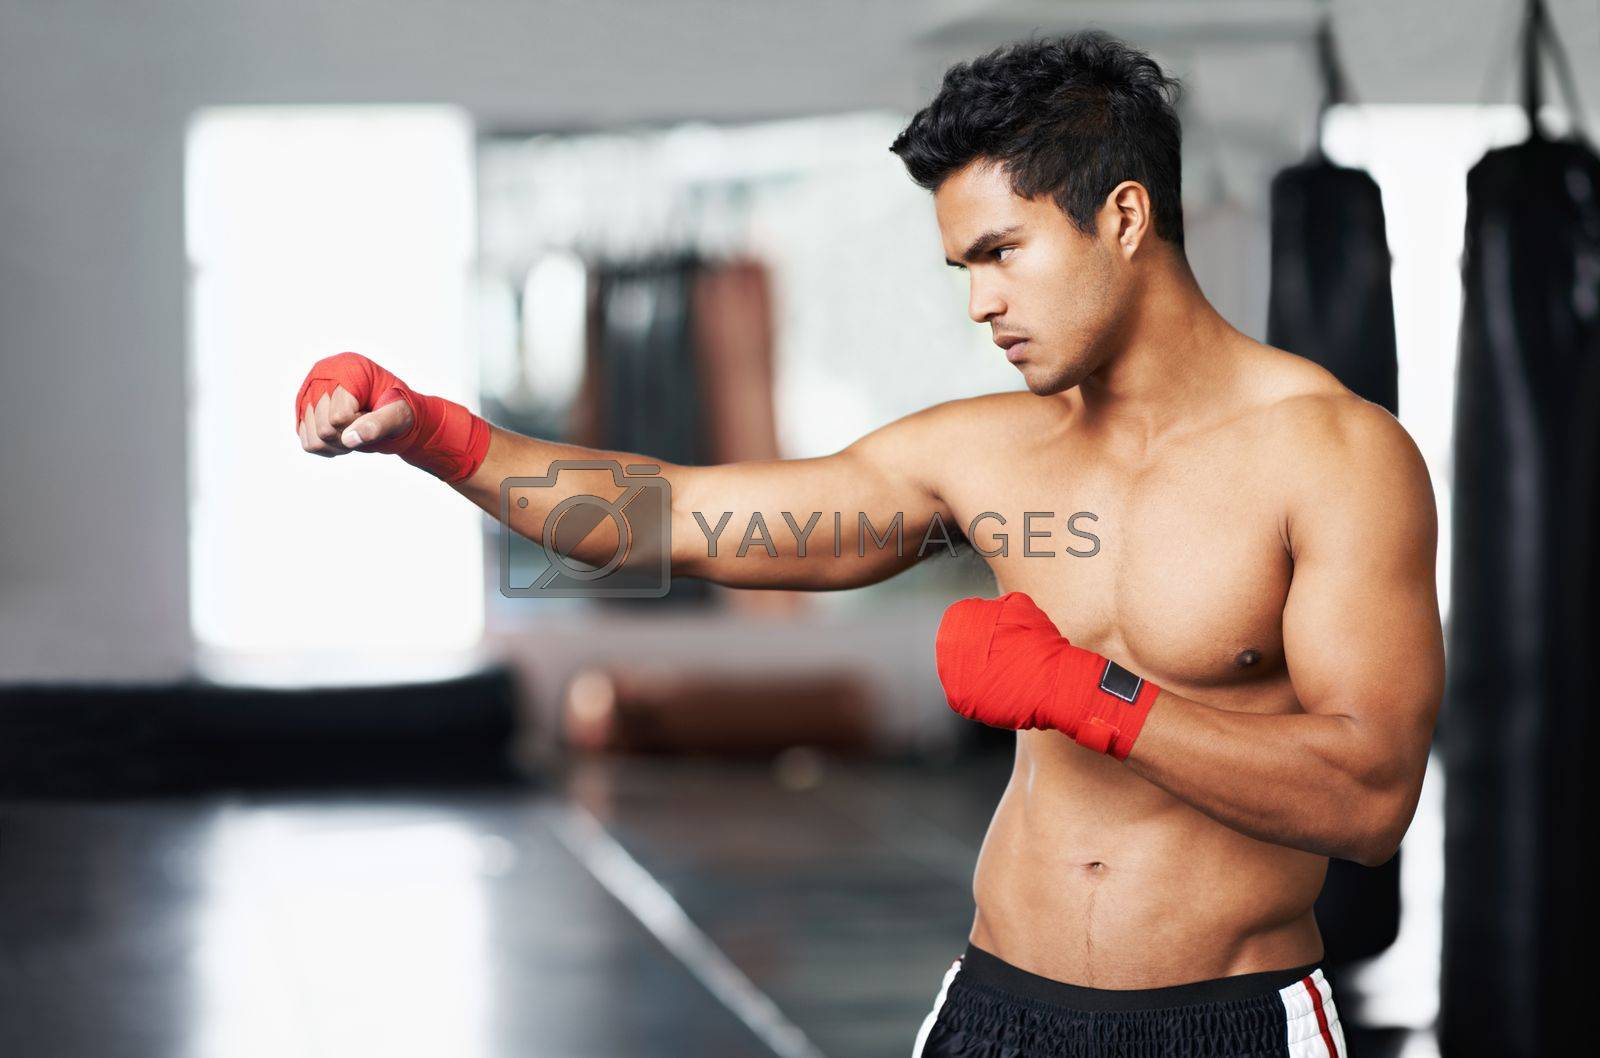 Fitness is his number goal. A fitness shot of an athletic young man